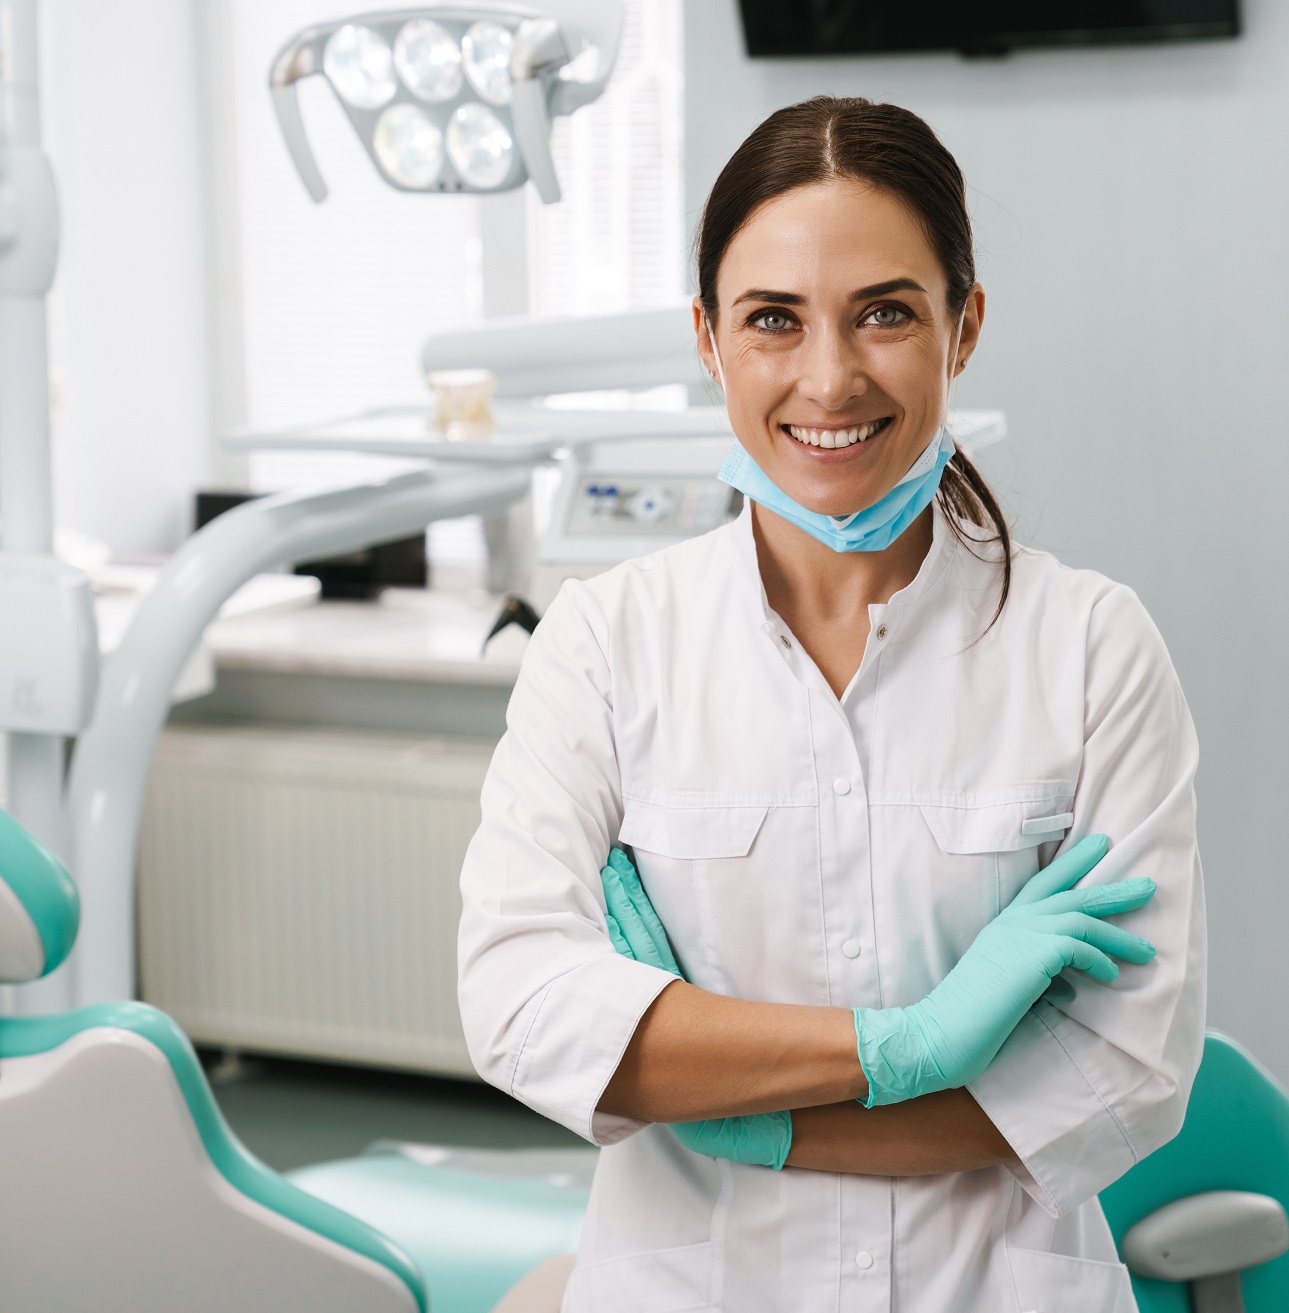 European Mid Dentist Woman Smiling While Standing In Dental Clinic